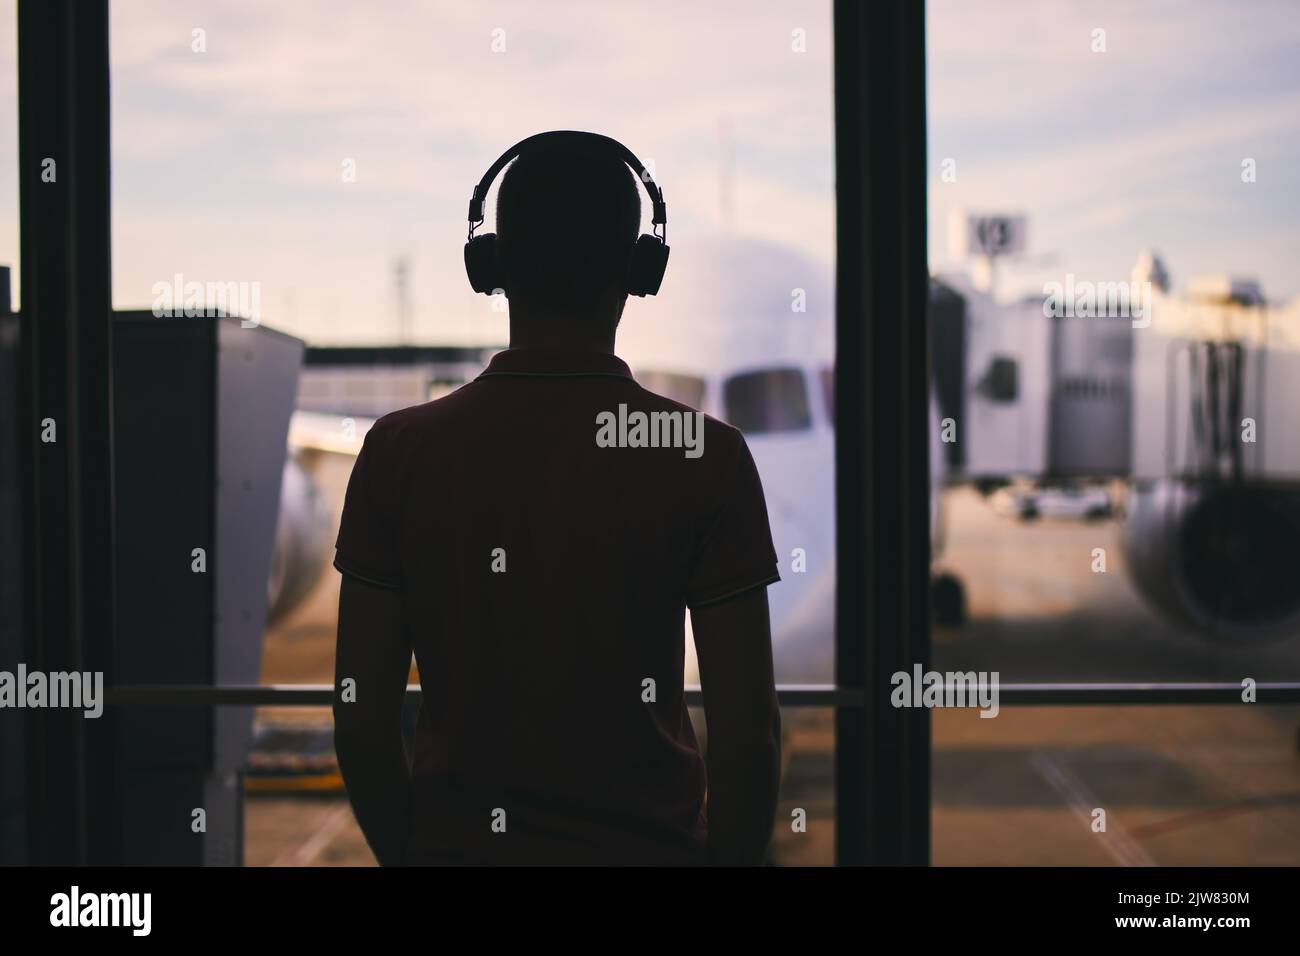 Silhouette of man with headphones while waiting for flight. Traveler looking from window of airport terminal before boarding to airplane. Stock Photo